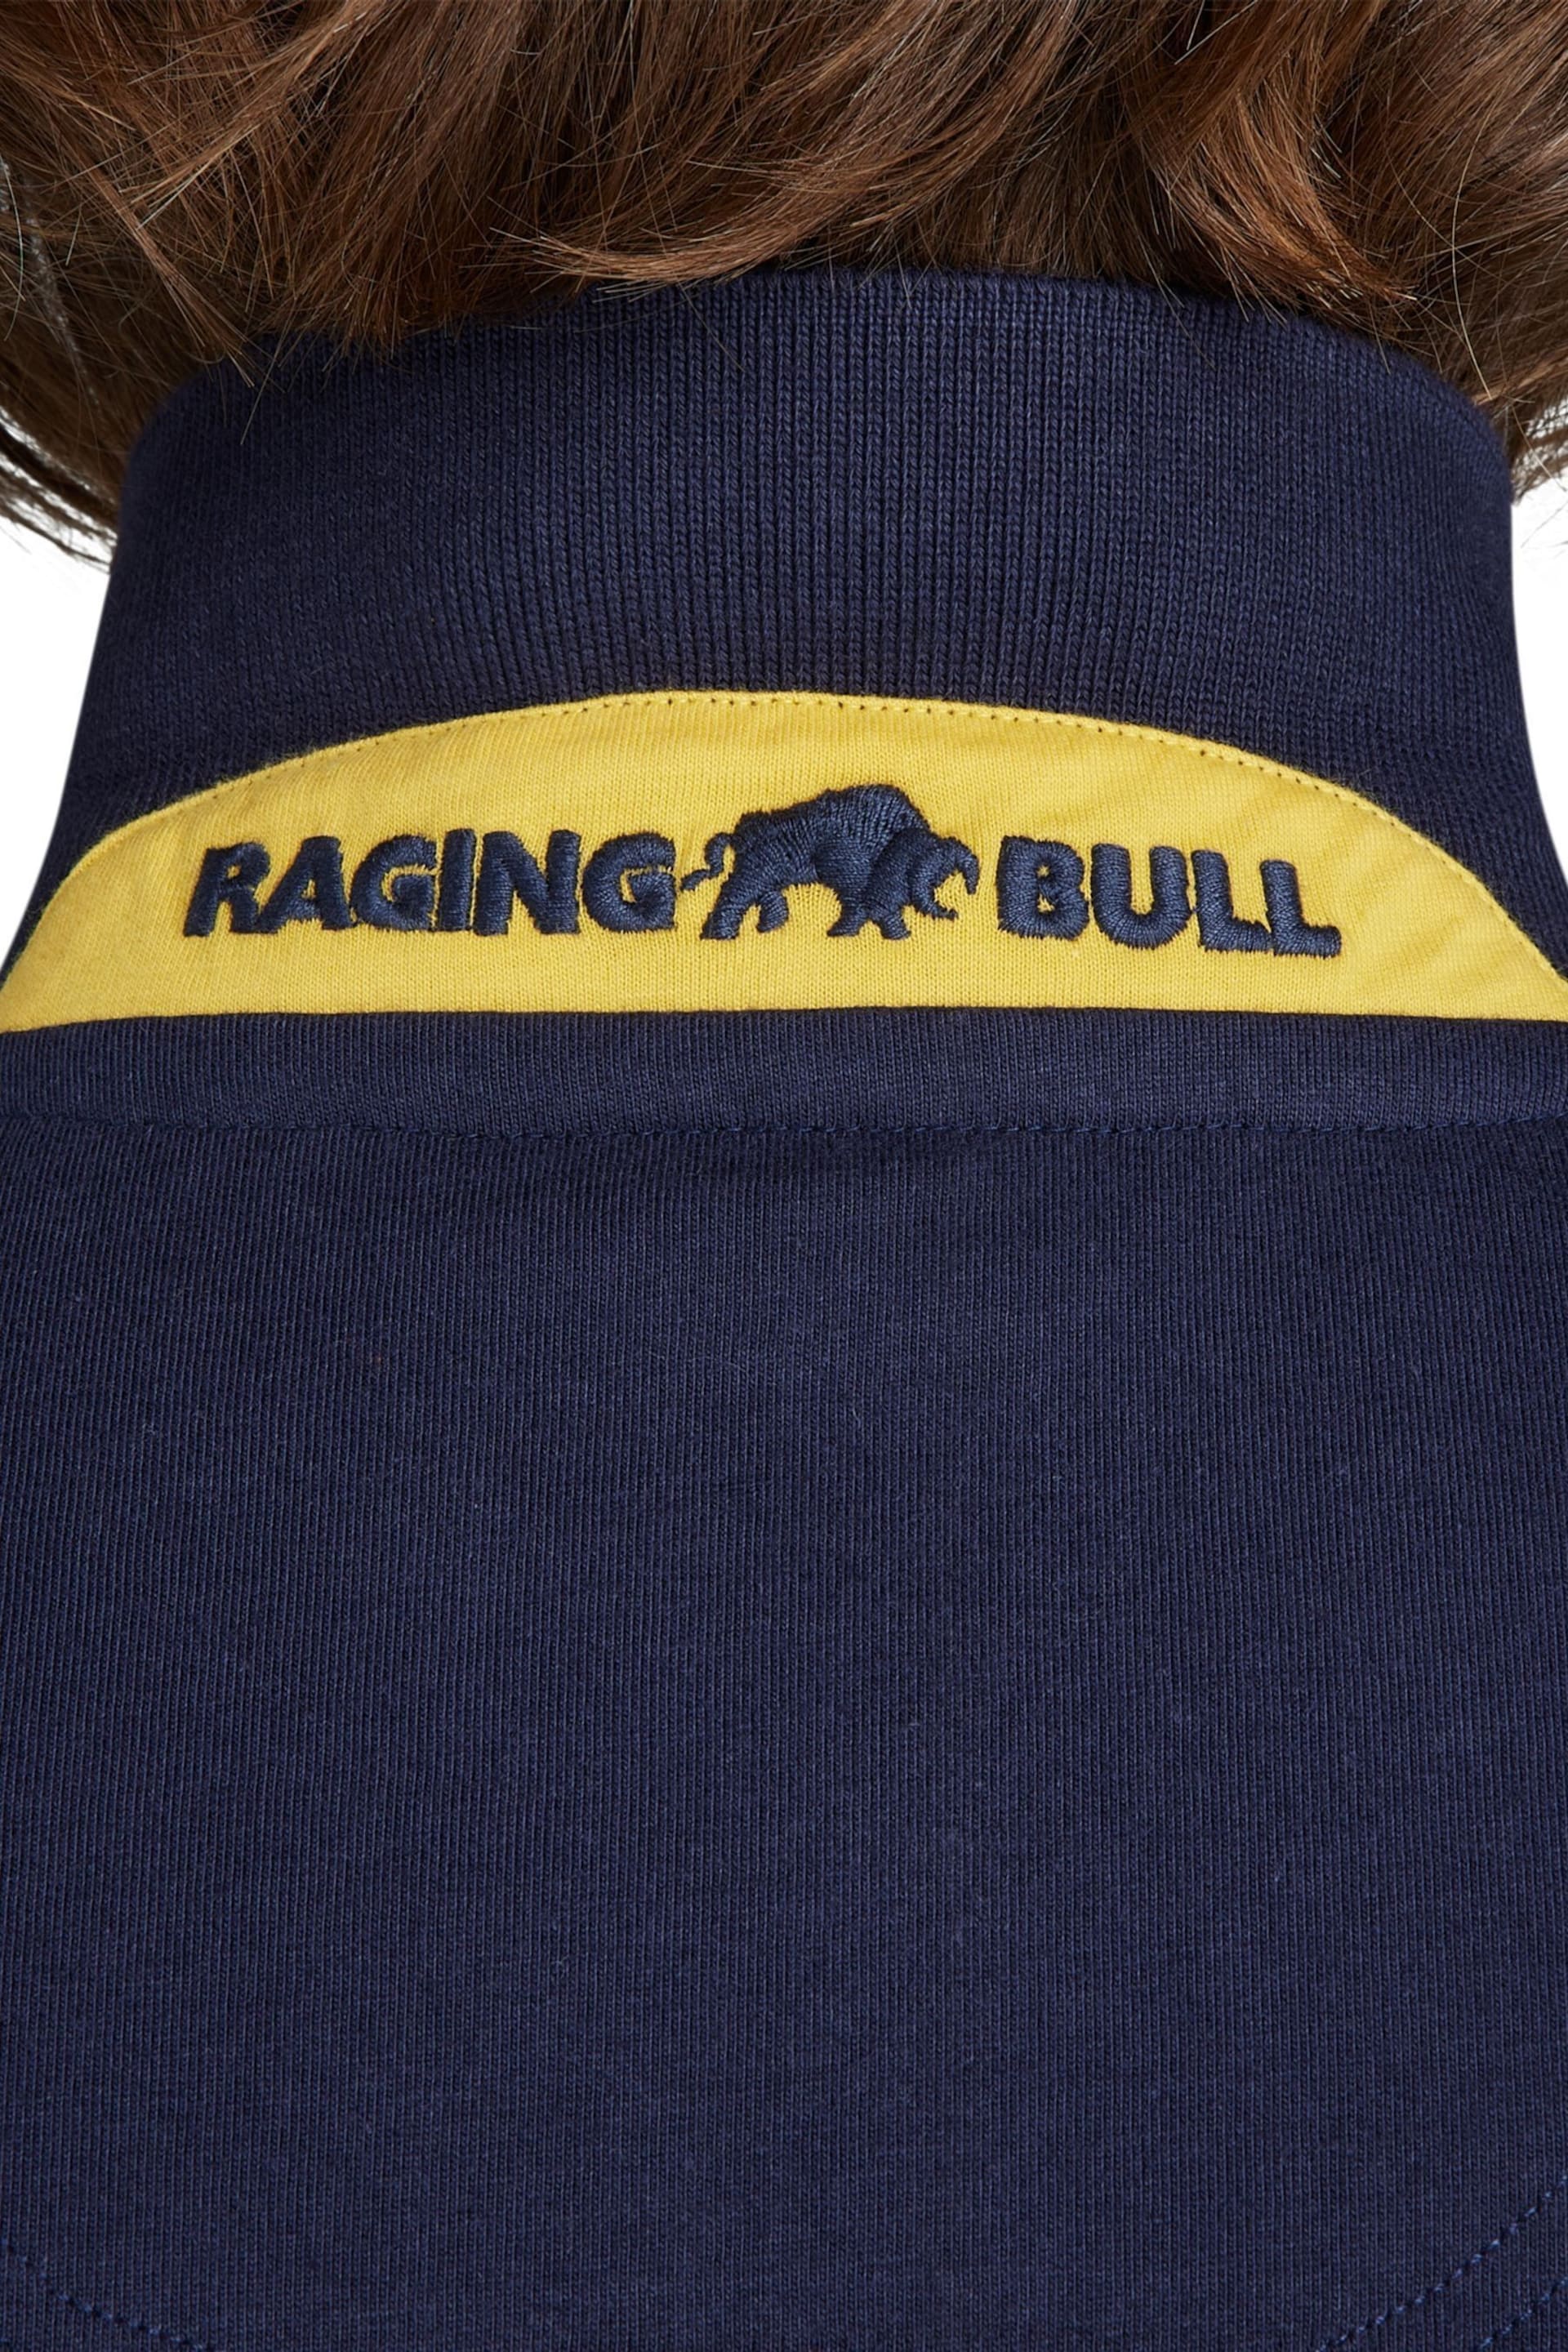 Raging Bull Blue No. 3 Jersey Polo Shirt - Image 6 of 8